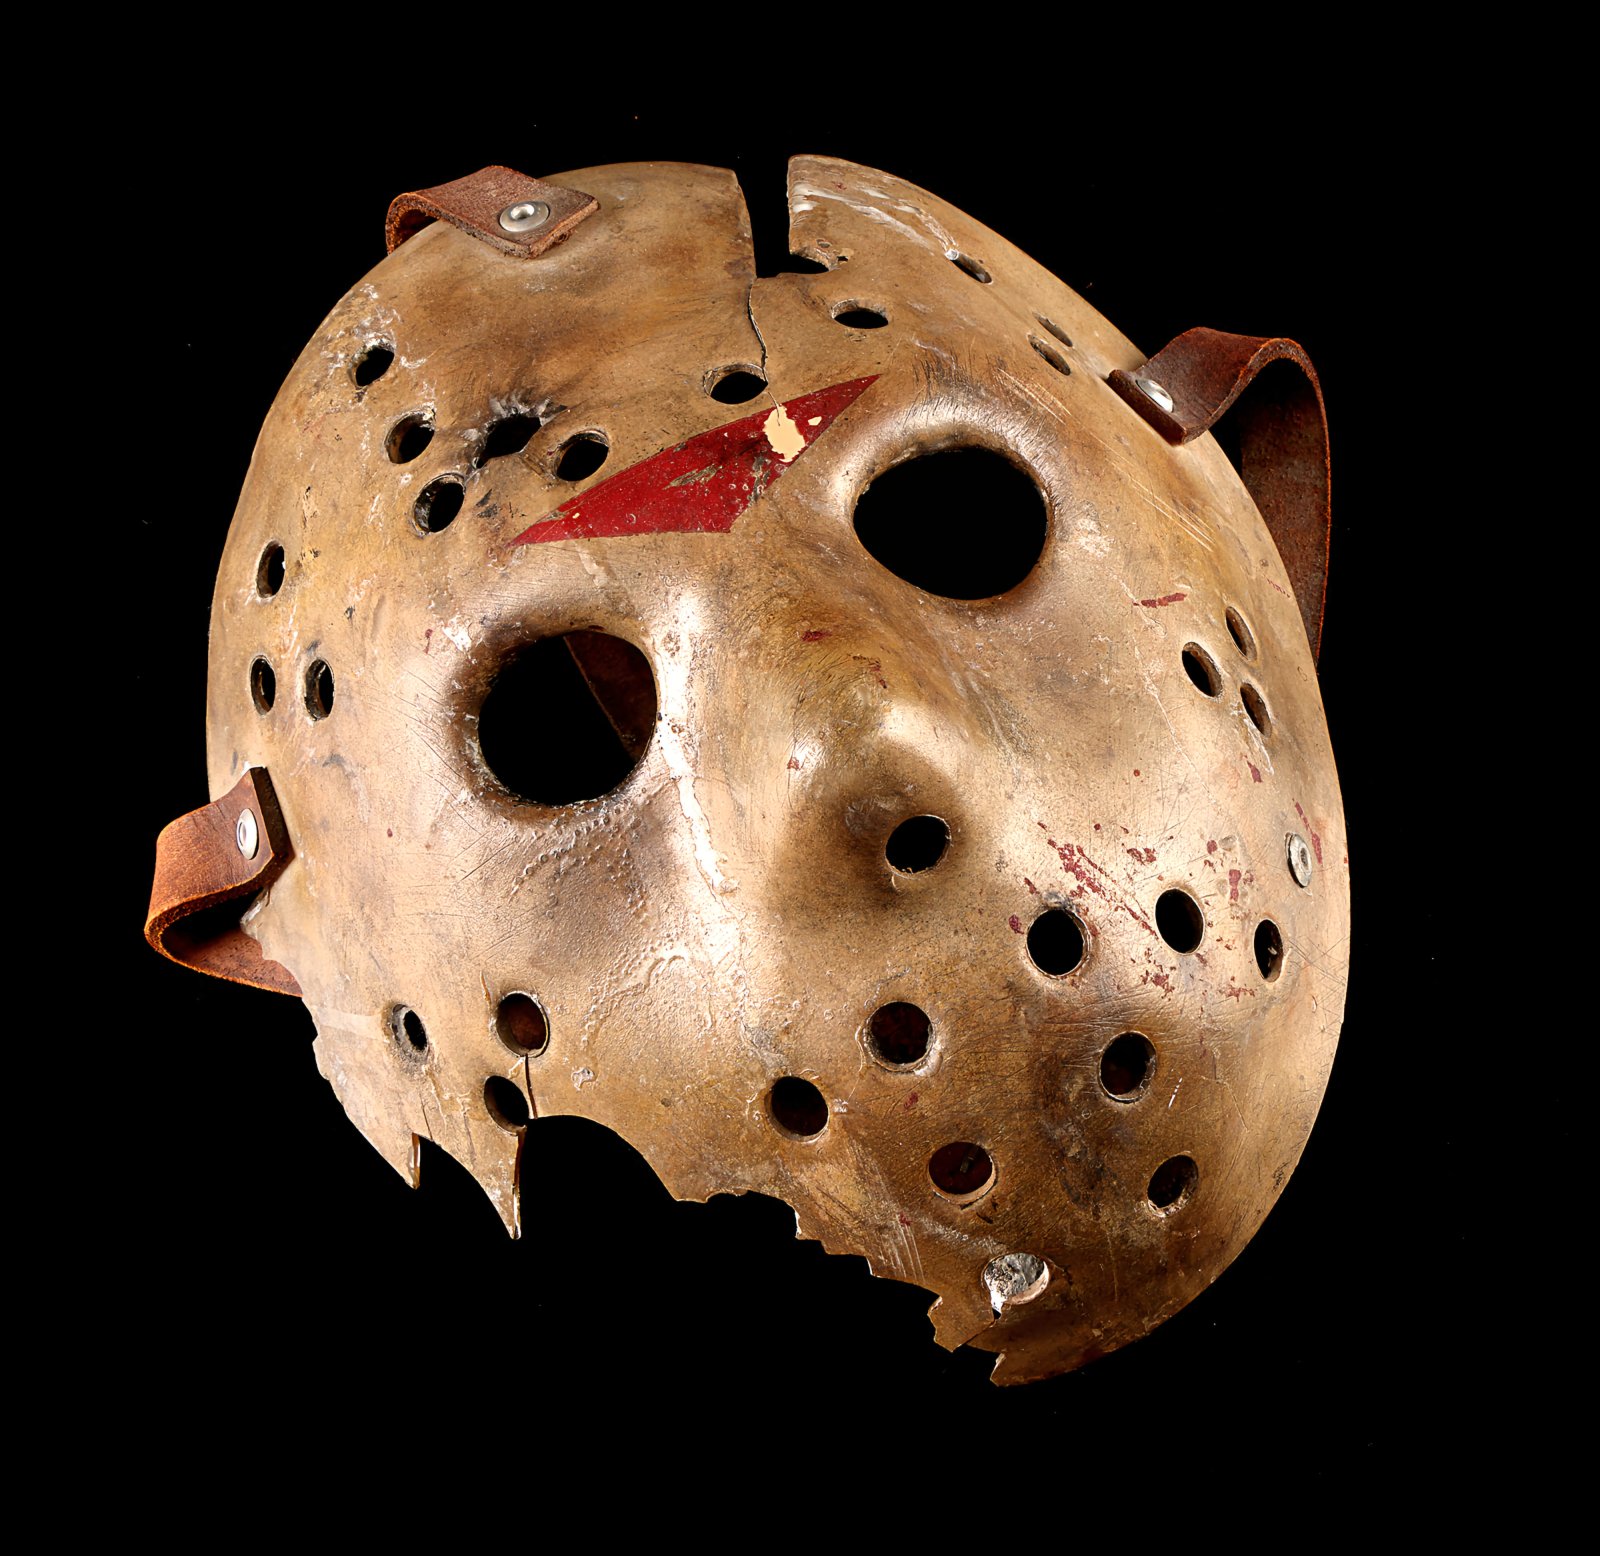 Jason-Voorhees-Screen-matched-Hero-Hockey-Mask-Movie-Memorabilia-Available-for-Auction.jpg